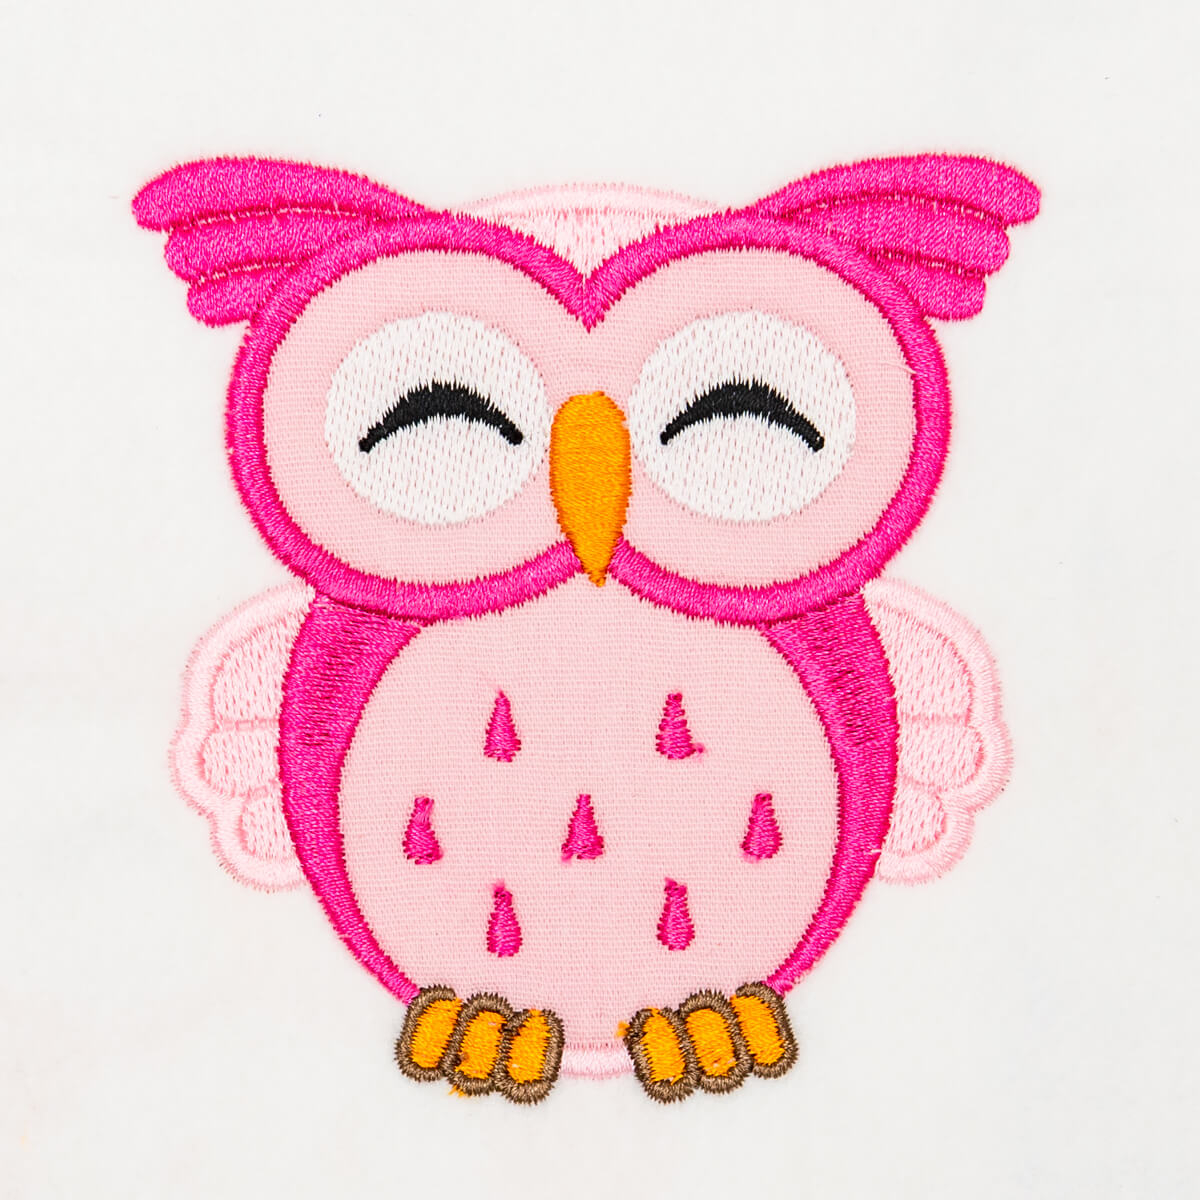 Owl Embroidery Pattern Cute Owl Applique Embroidery Design 5 Sizes 699 At E Embroidery